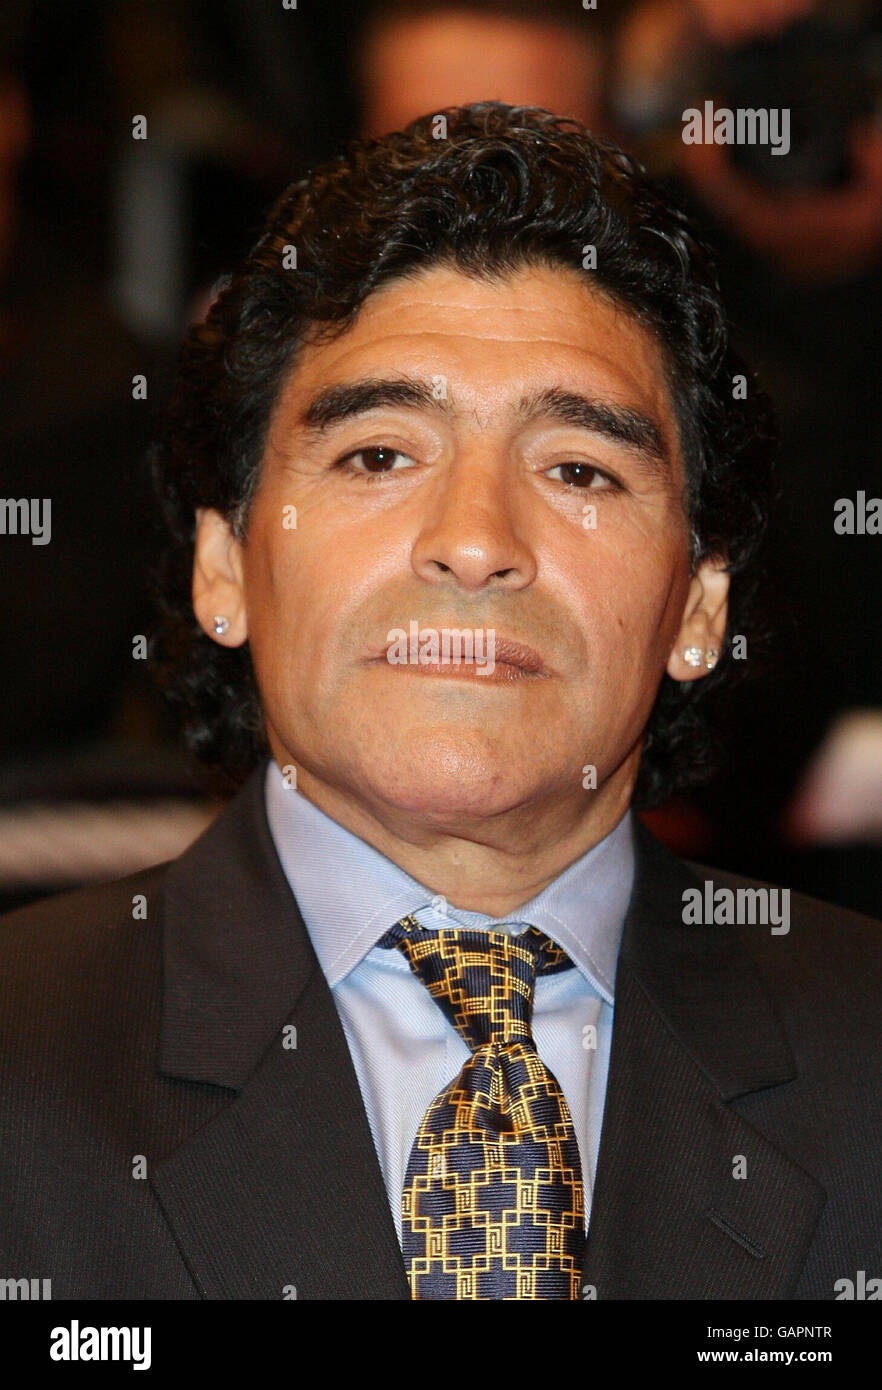 AP OUT. Maradona arrives for the screening of 'Maradona' by Emir Kusturica during the 61st Cannes Film Festival in France. Stock Photo